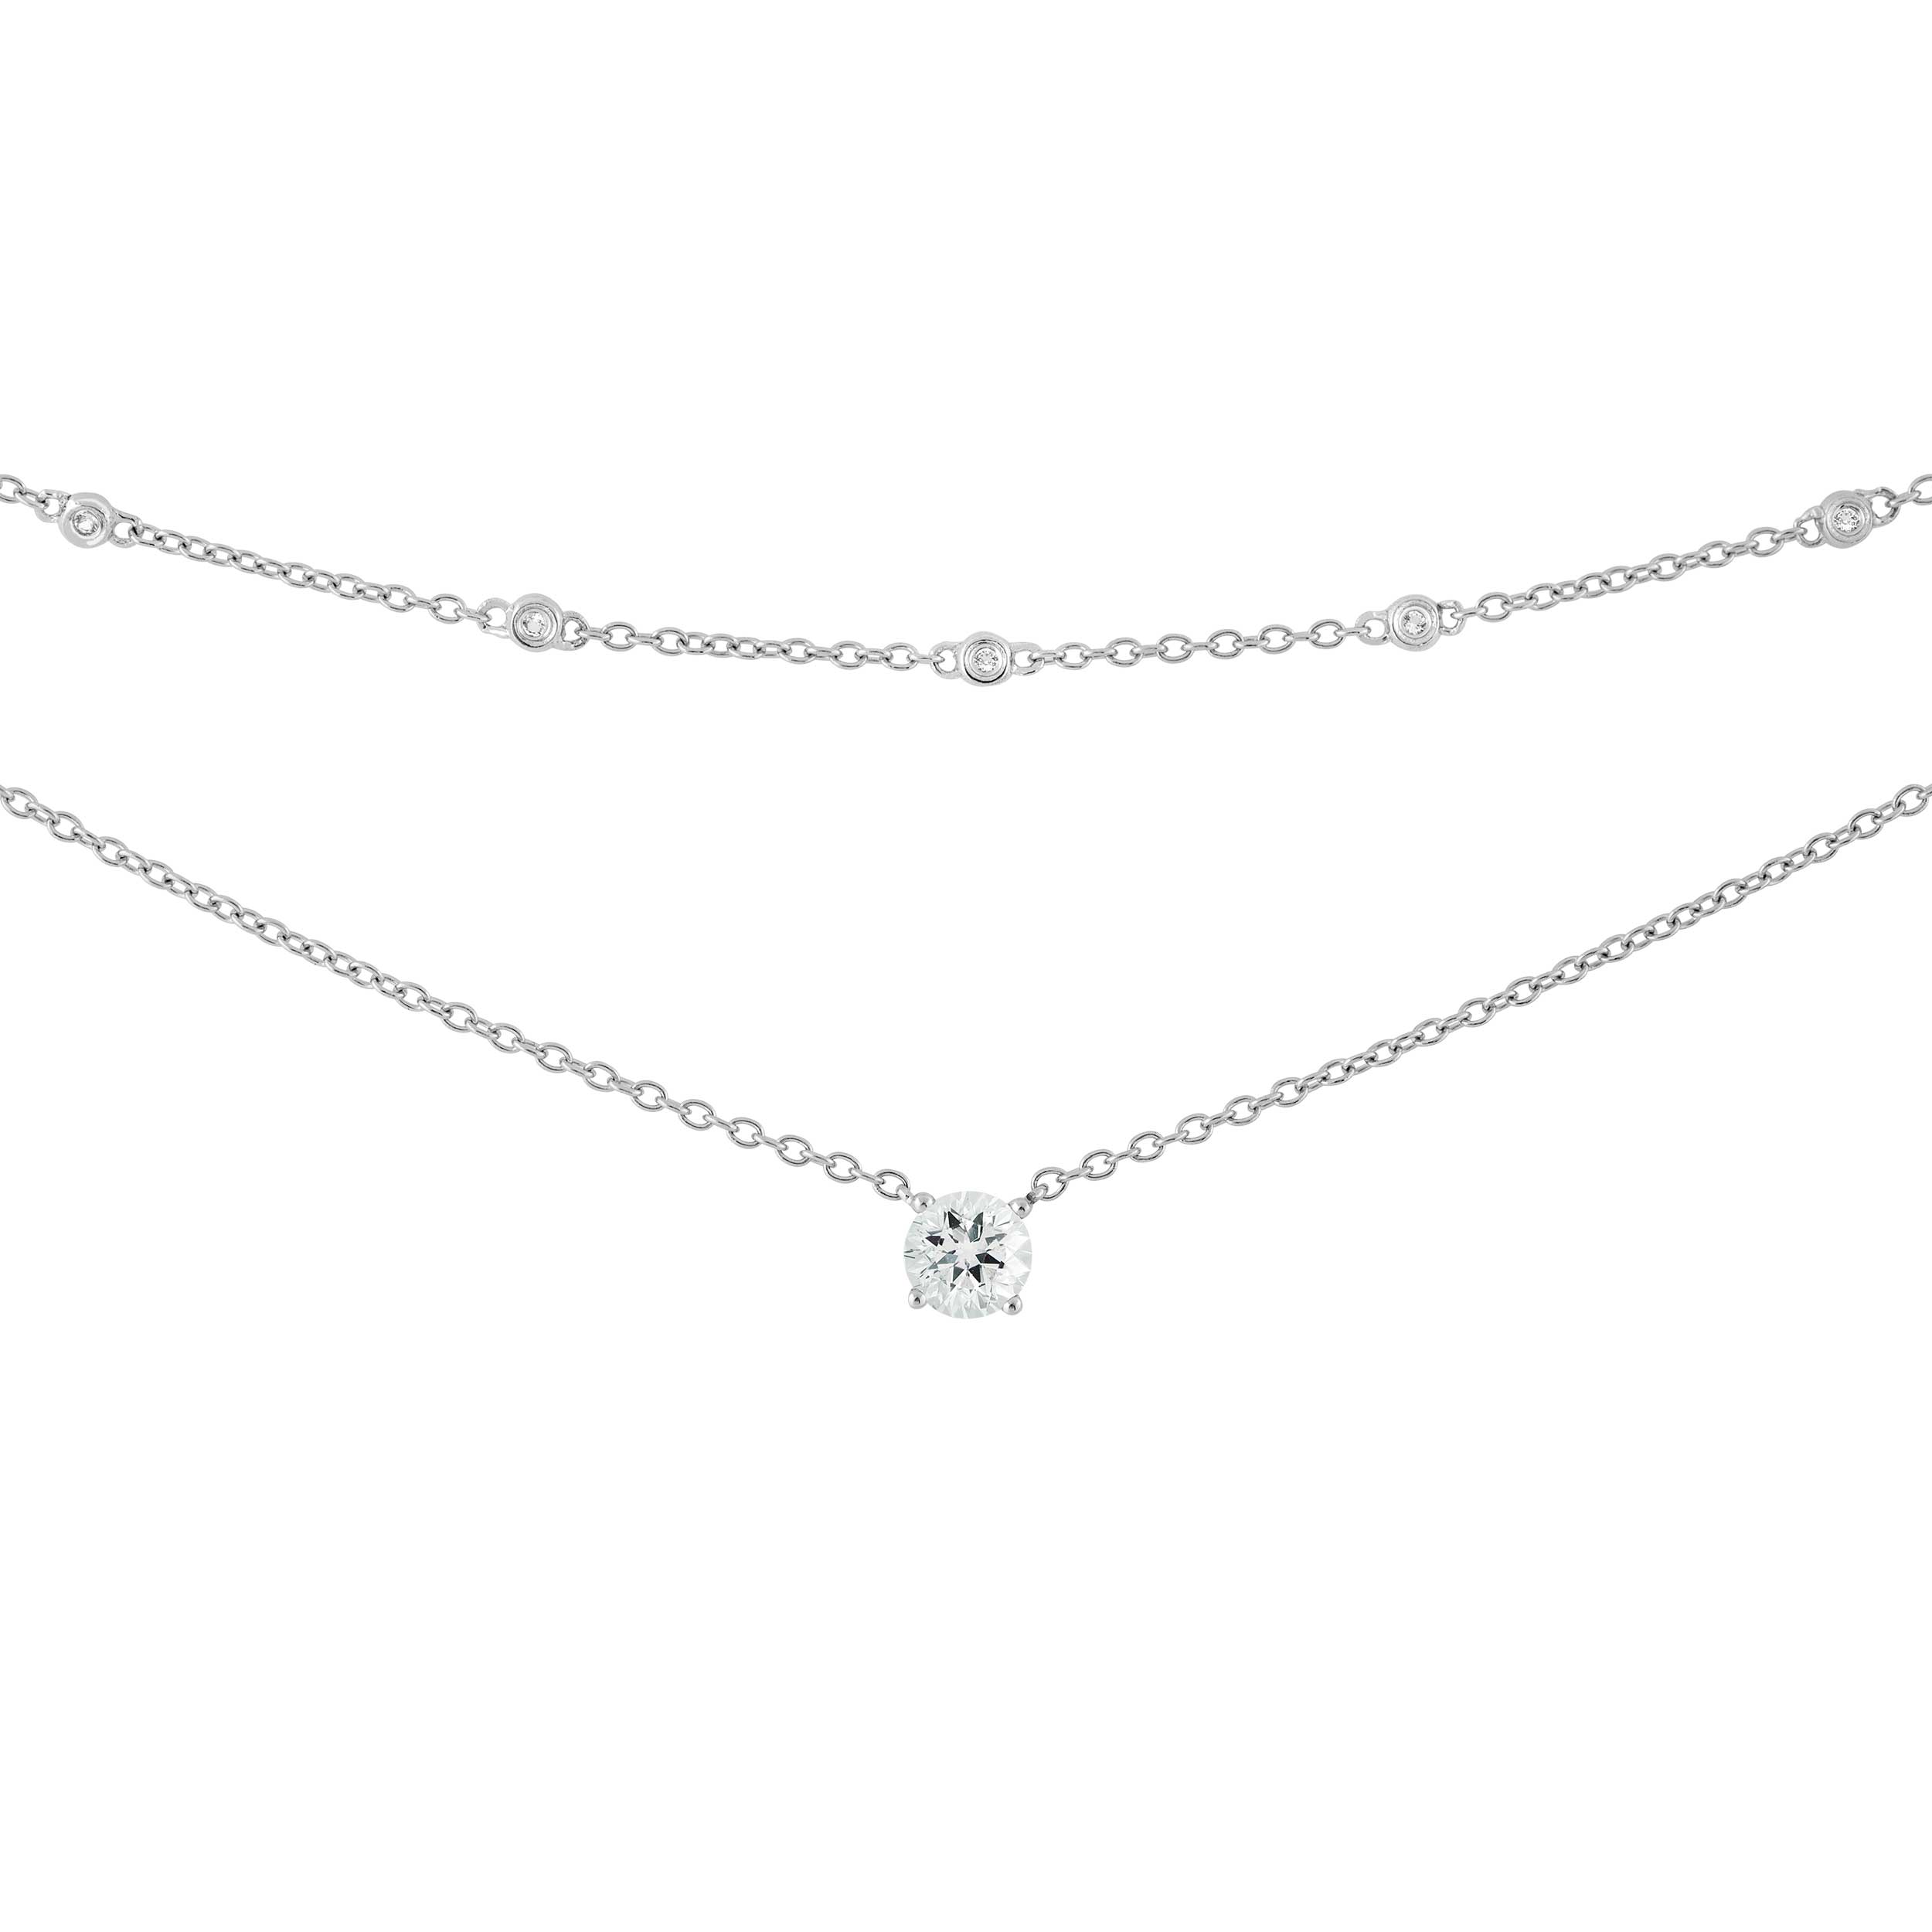 White Topaz Pendant Necklace, Rhodium Plated Sterling Silver